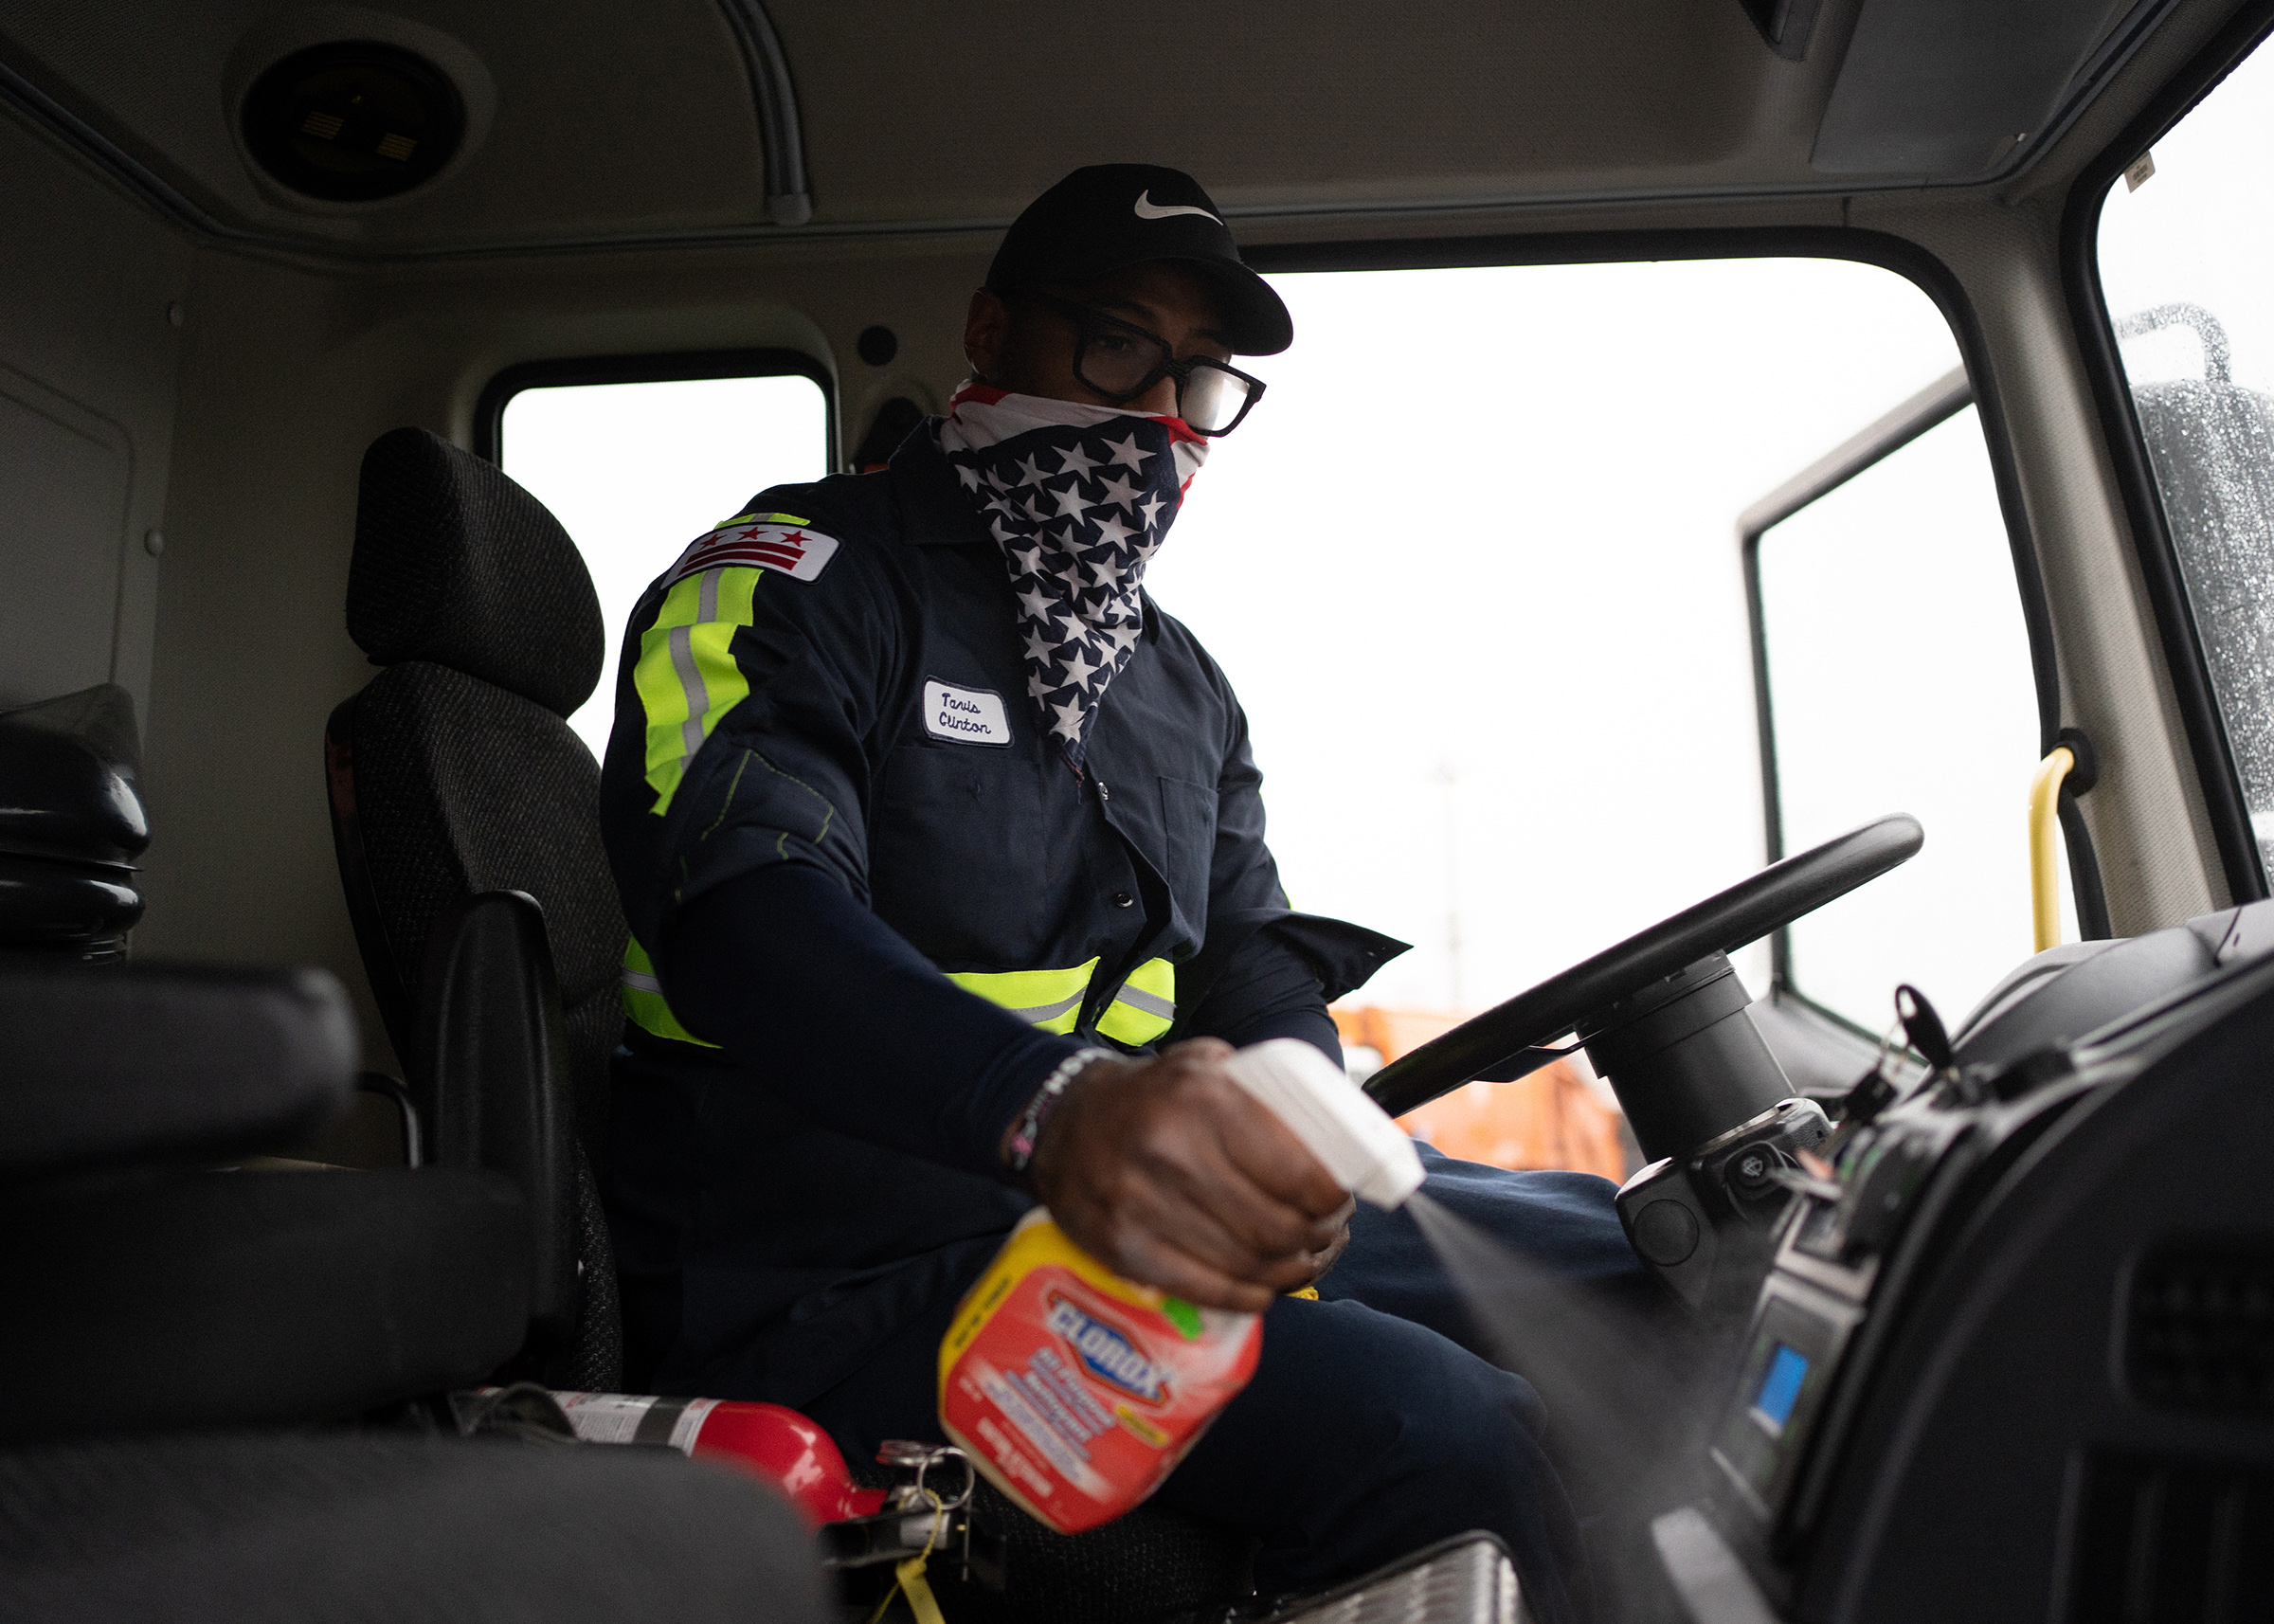 Tavis Clinton disinfects his truck before beginning his route on May 22. (Nate Palmer for TIME)